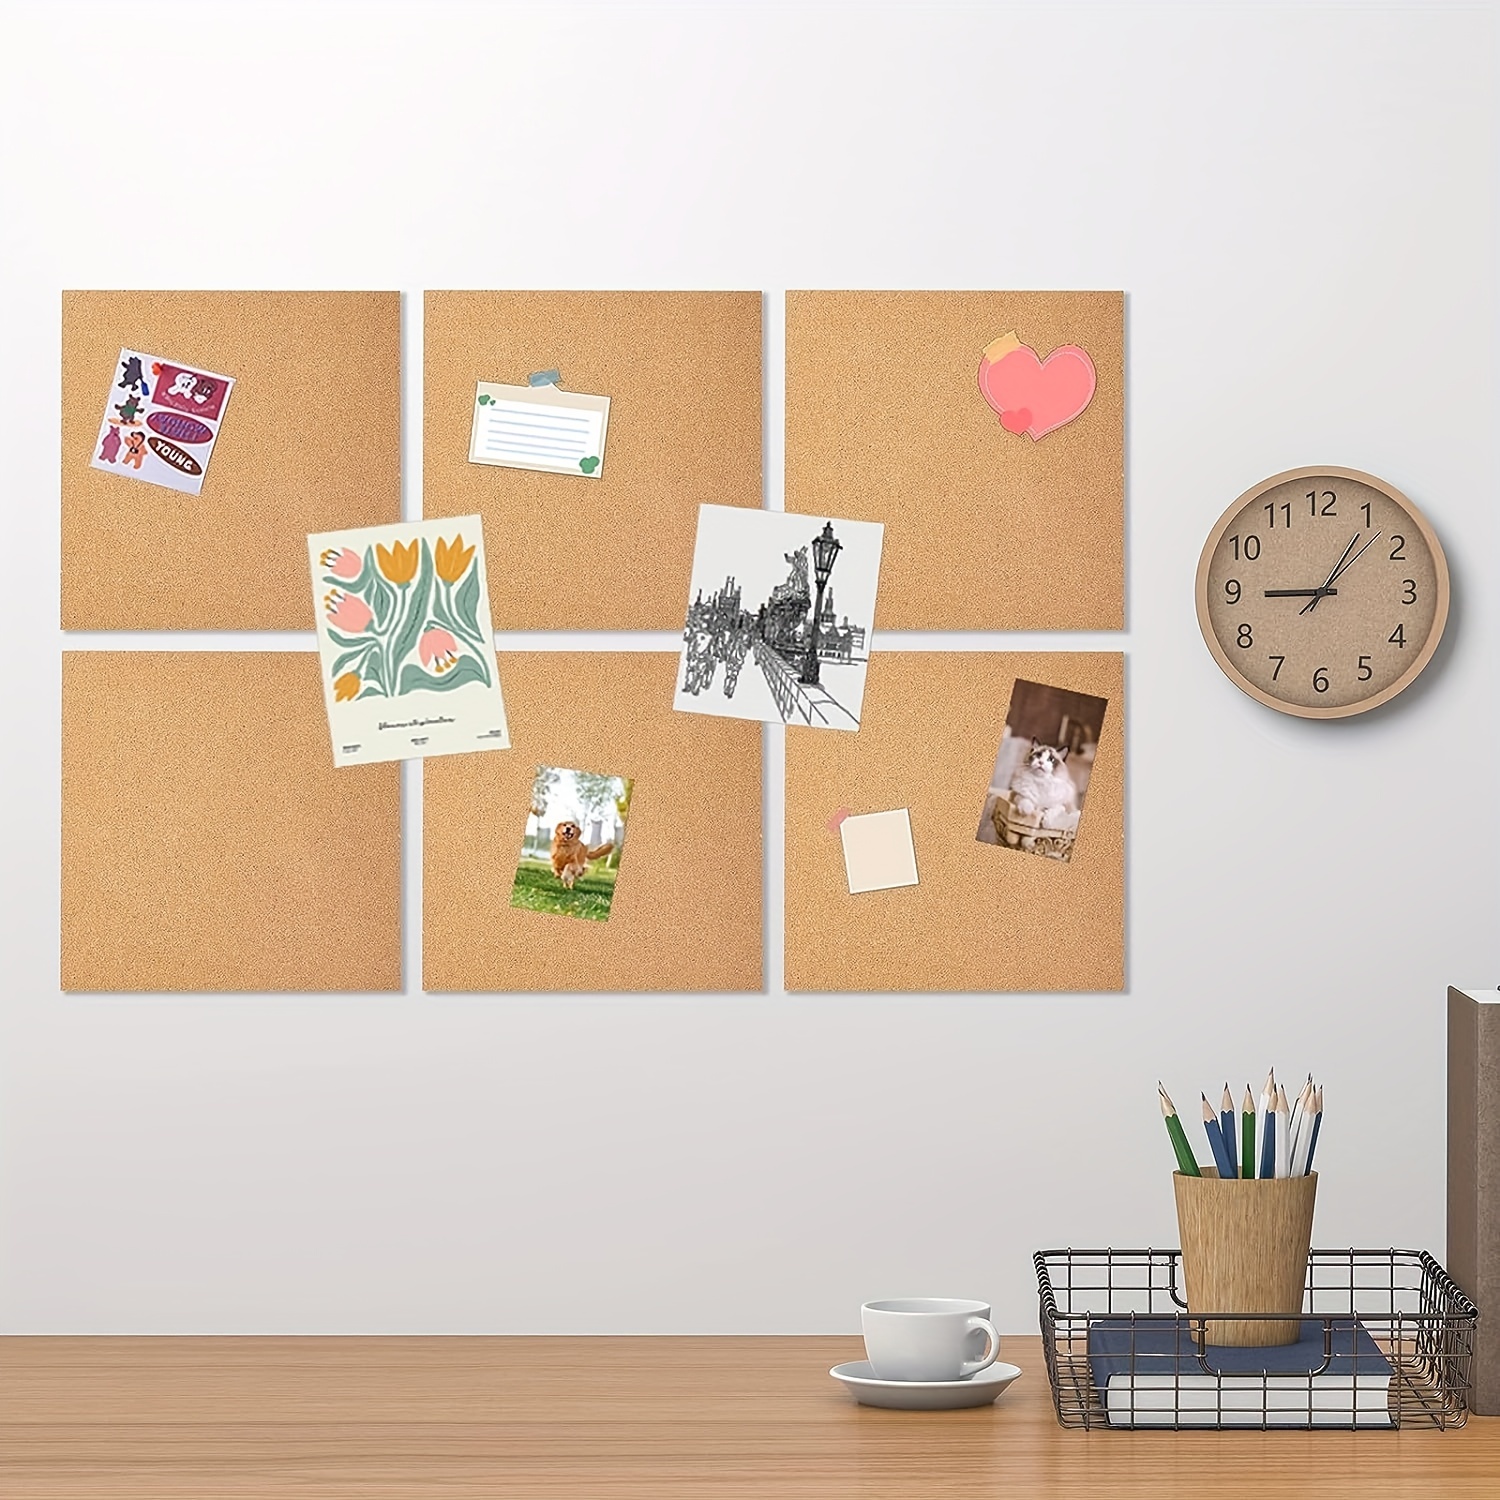 14 Pcs Cork Board Tiles 12 x 12 in 1/2 in Thick Square Bulletin Boards Cork  Tiles Bulk with Push Pins Mini Natural Self Adhesive Backing Corkboards